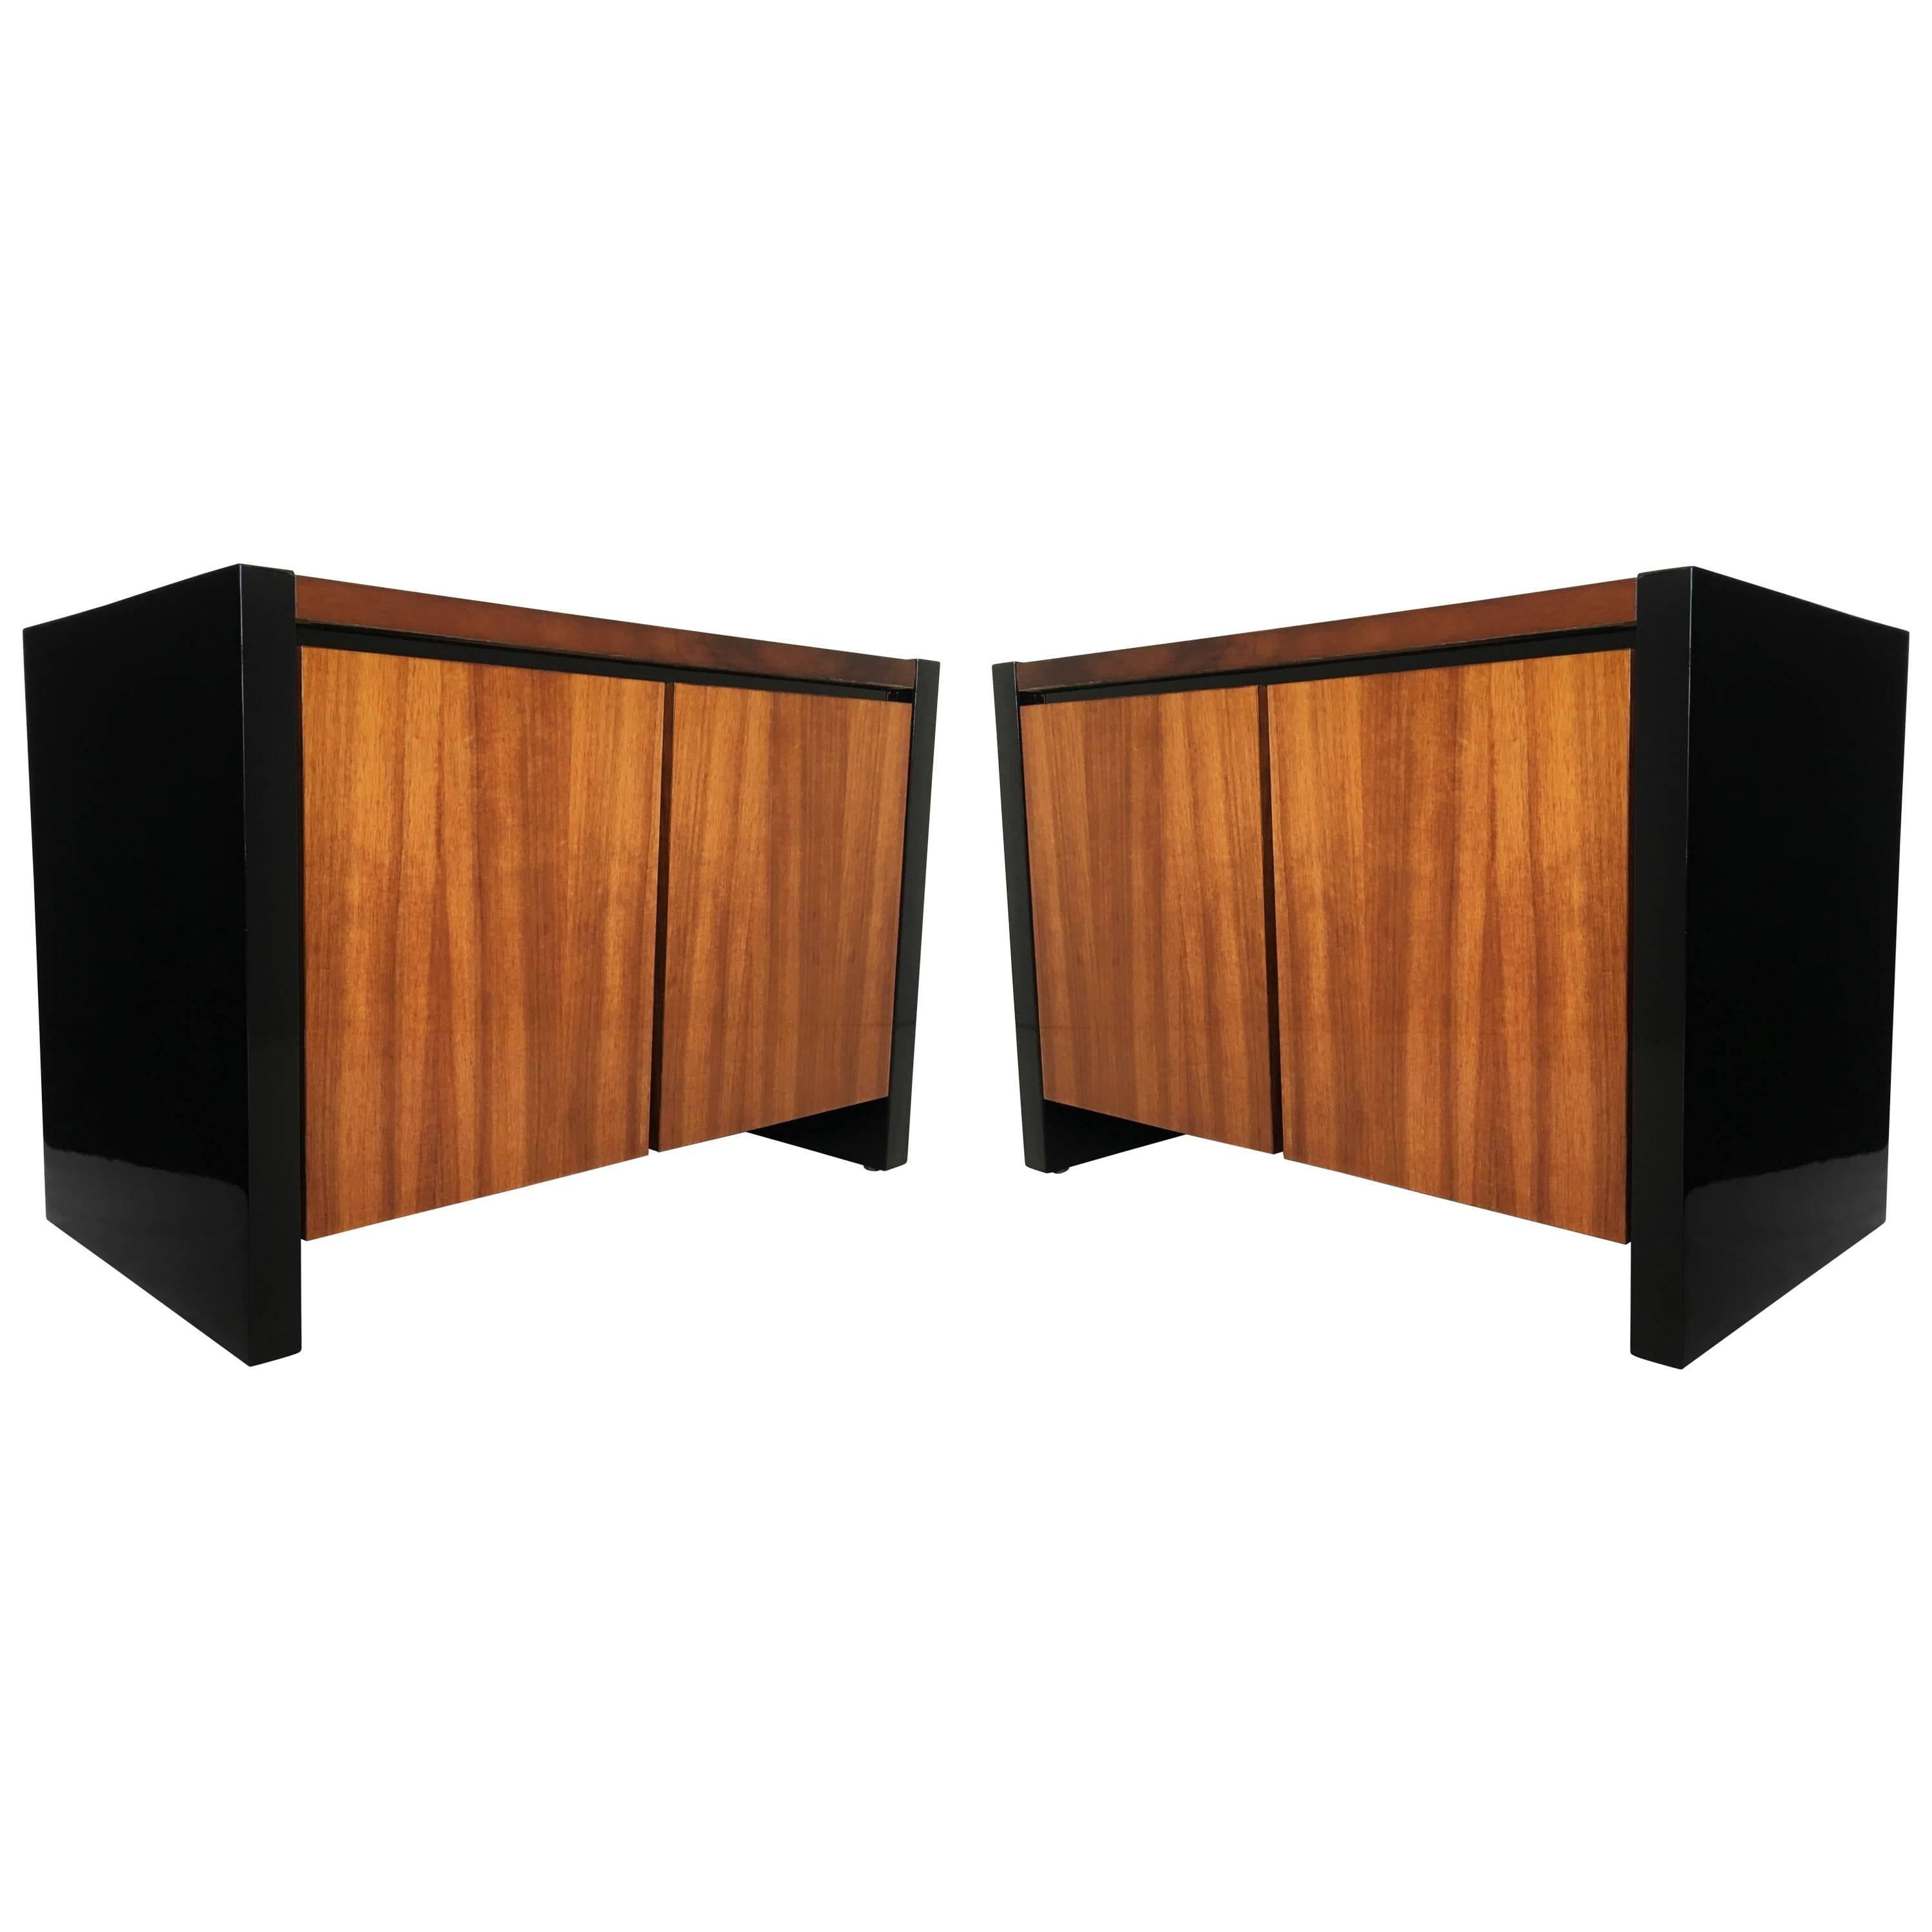 Pair of Black Lacquer and Koa Wood Nightstands by Henredon For Sale